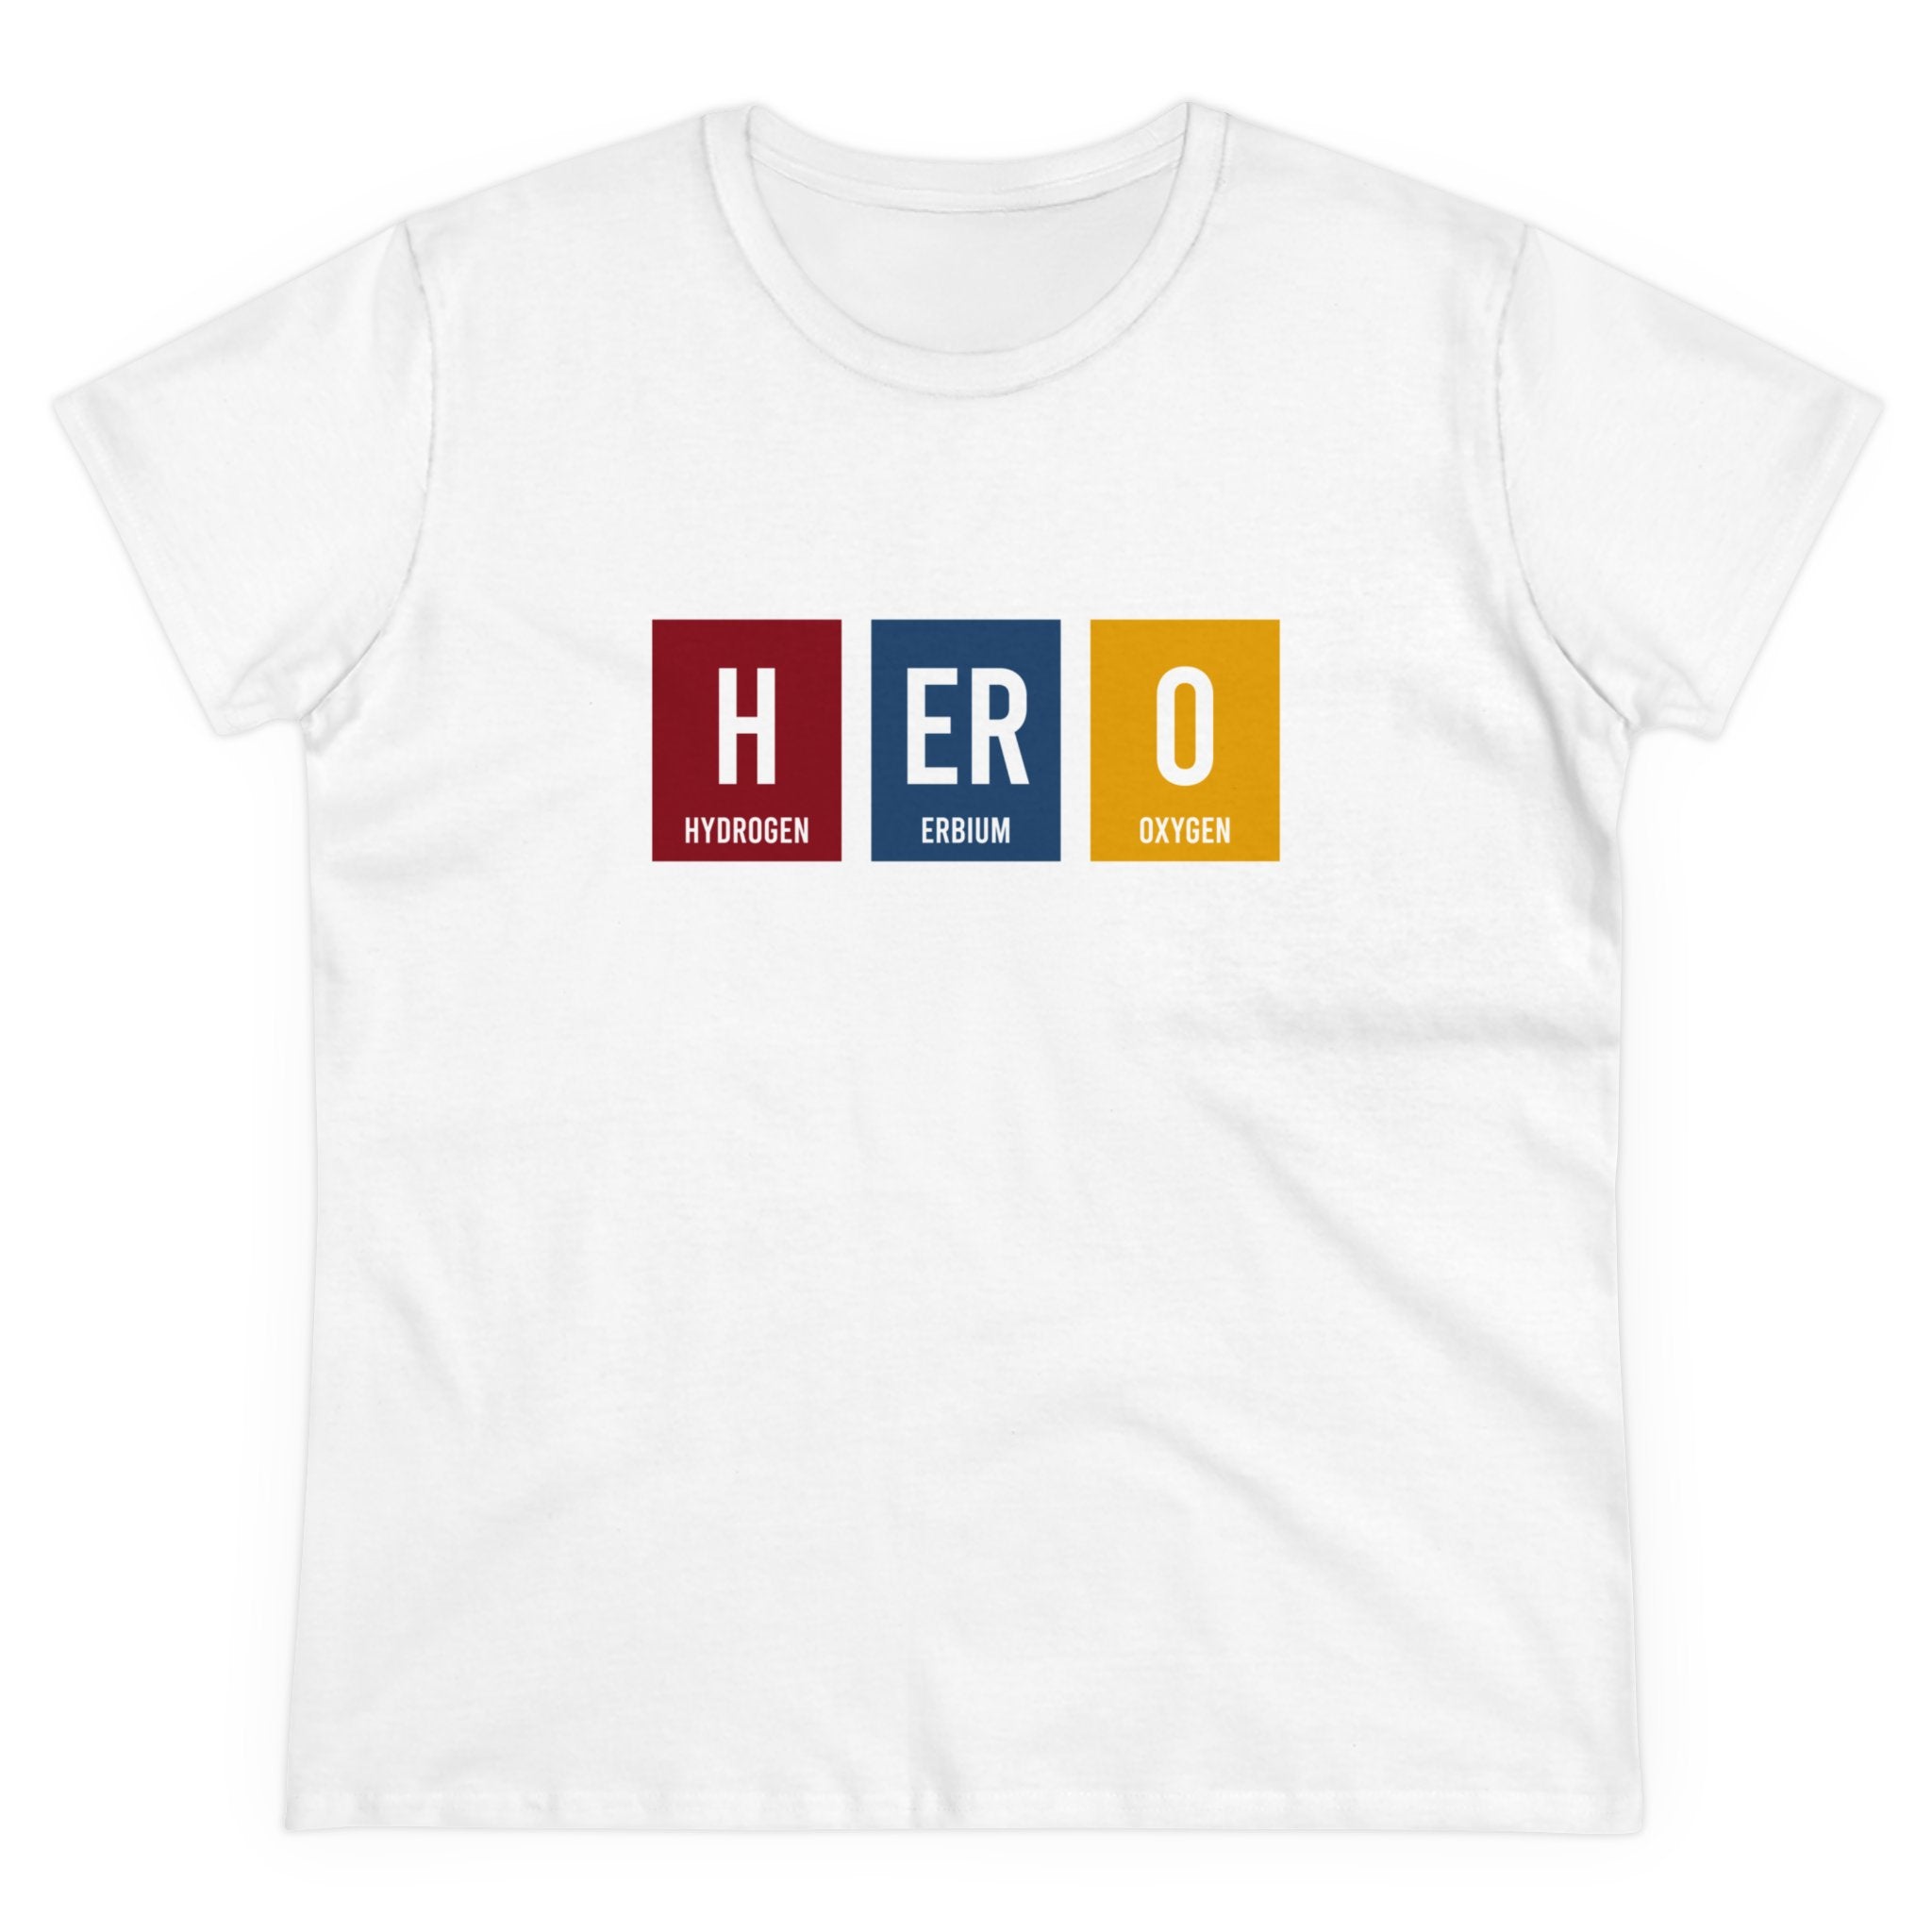 White T-shirt with the word "HERO" formed by elements from the periodic table: Hydrogen (H), Erbium (Er), and Oxygen (O). Enjoy ultimate comfort while embracing sustainability. Complete your look with a matching HERO - Hooded Sweatshirt.